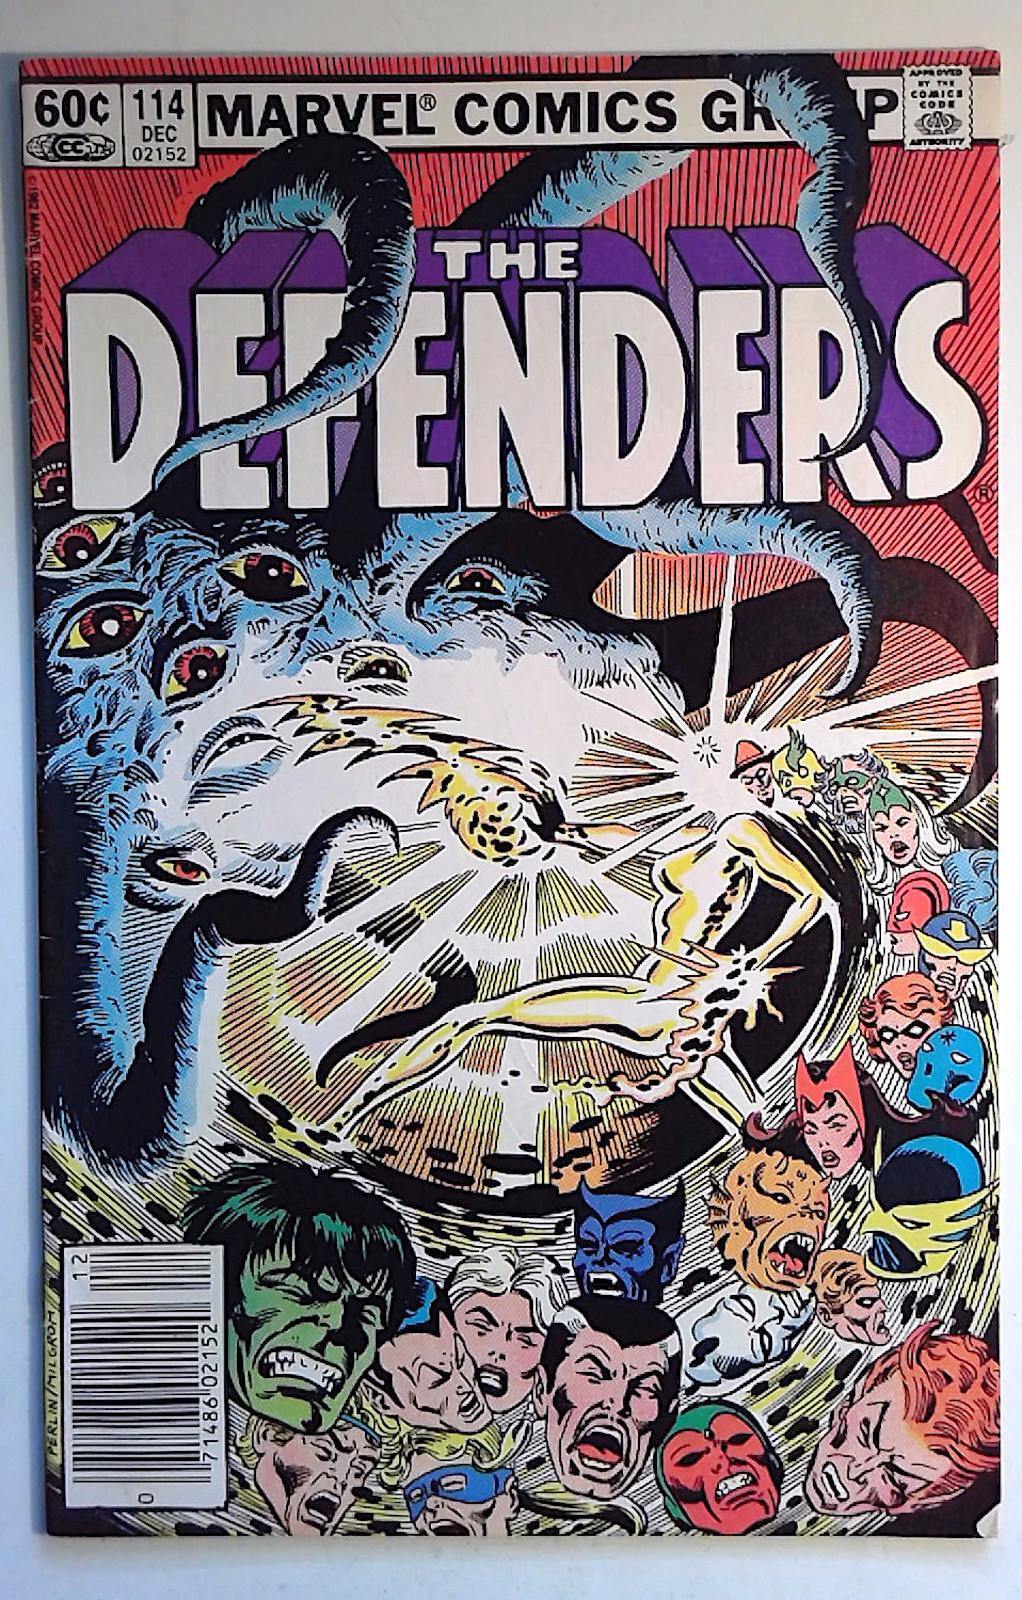 1982 The Defenders #114 Marvel Newsstand 1st Series 1st Print Comic Book